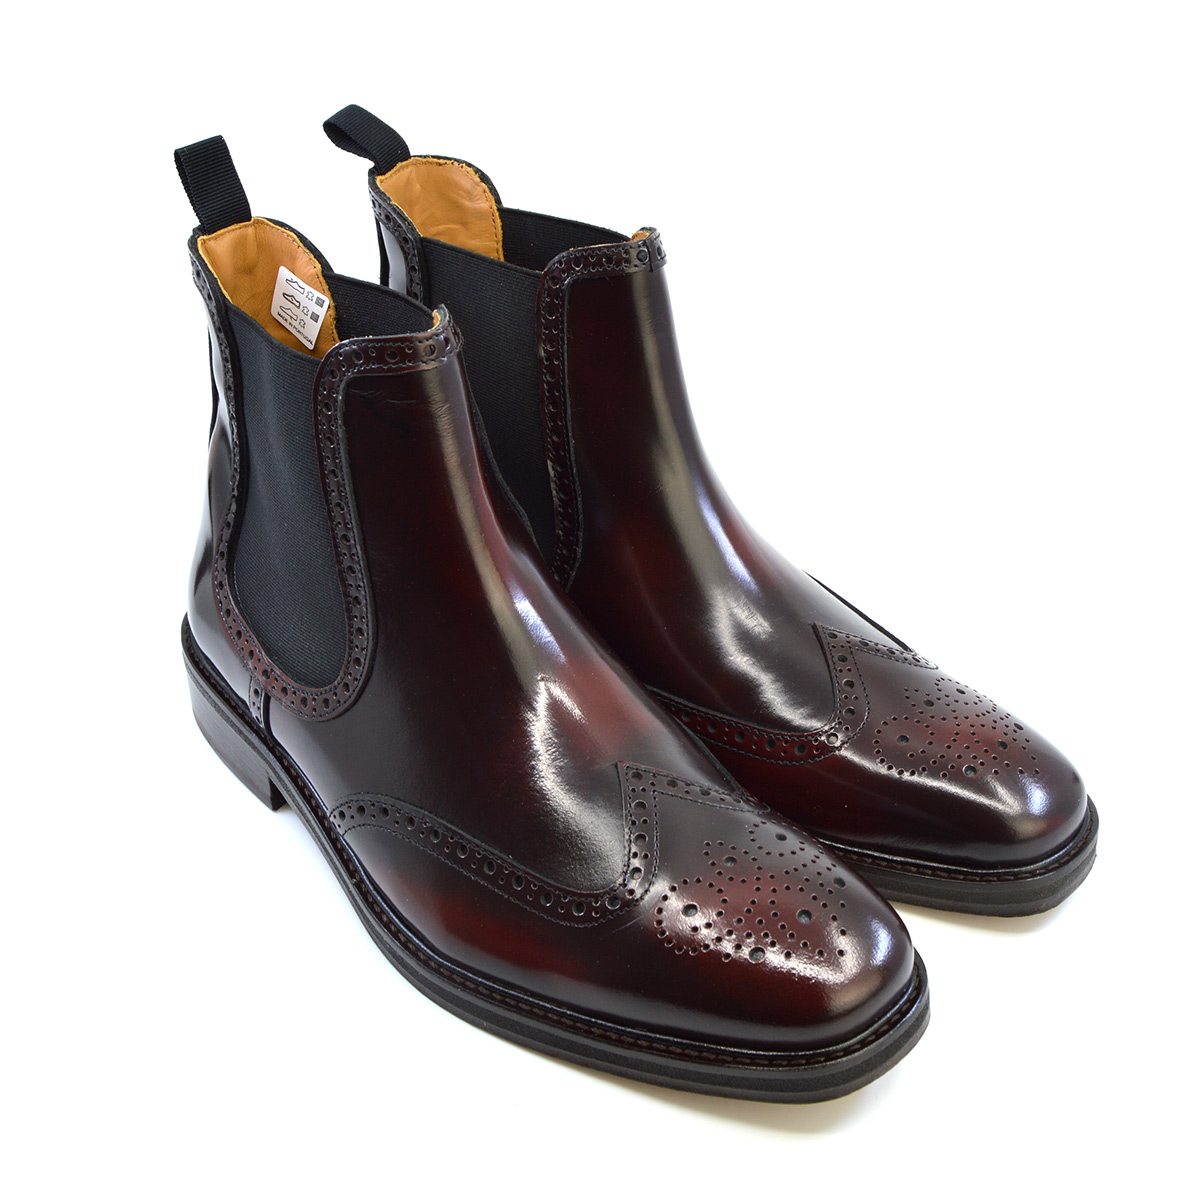 The Thomas – Oxblood Dealer Boots 